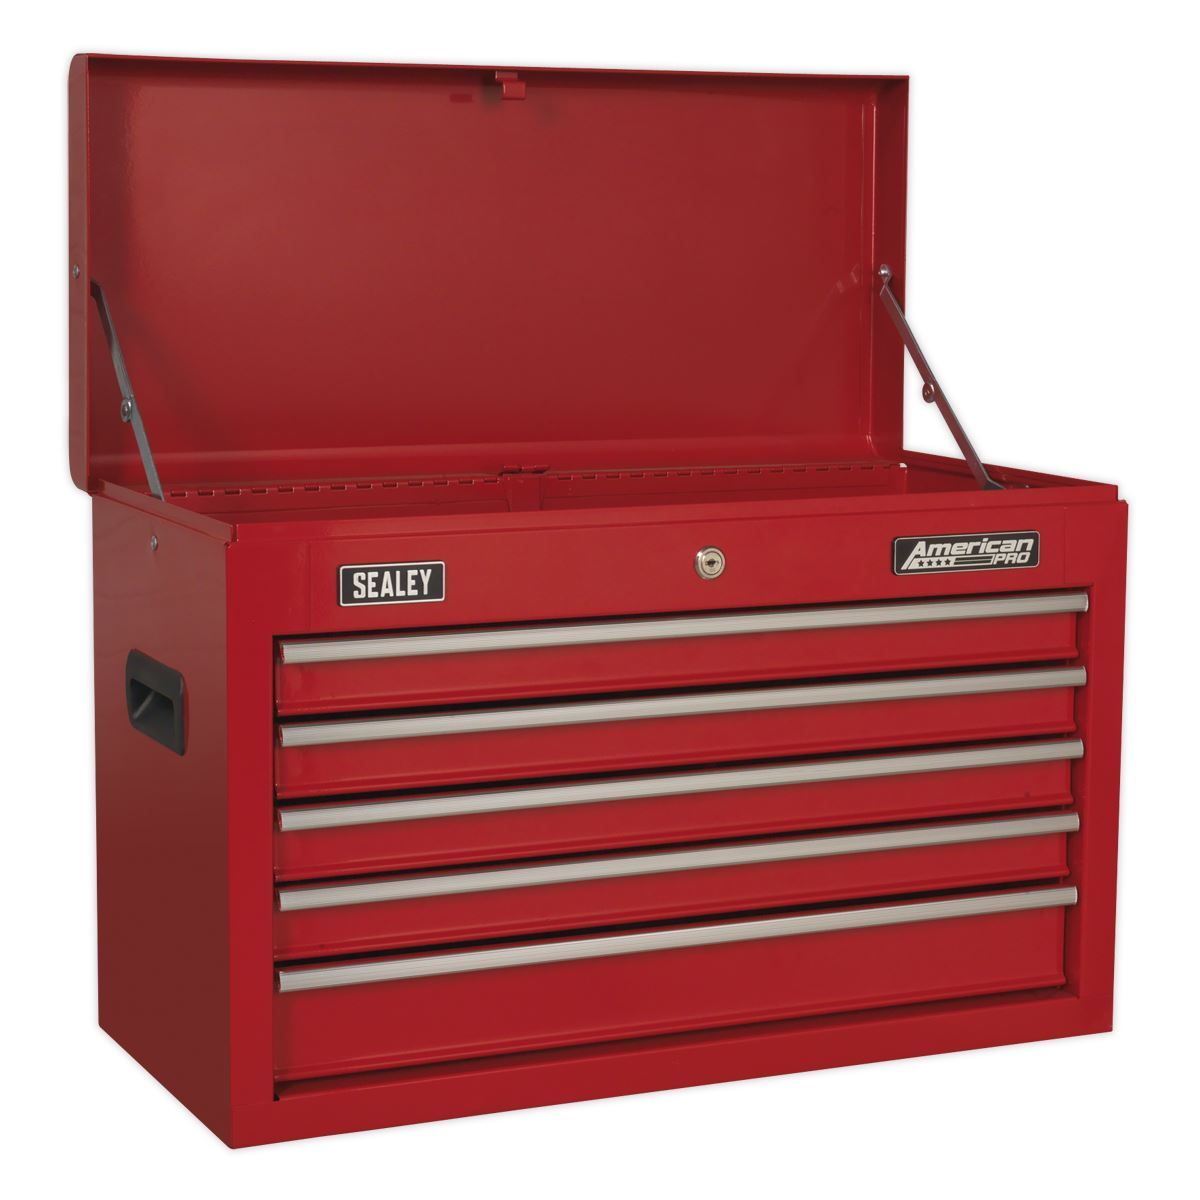 Sealey American Pro Topchest 5 Drawer with Ball-Bearing Slides - Red